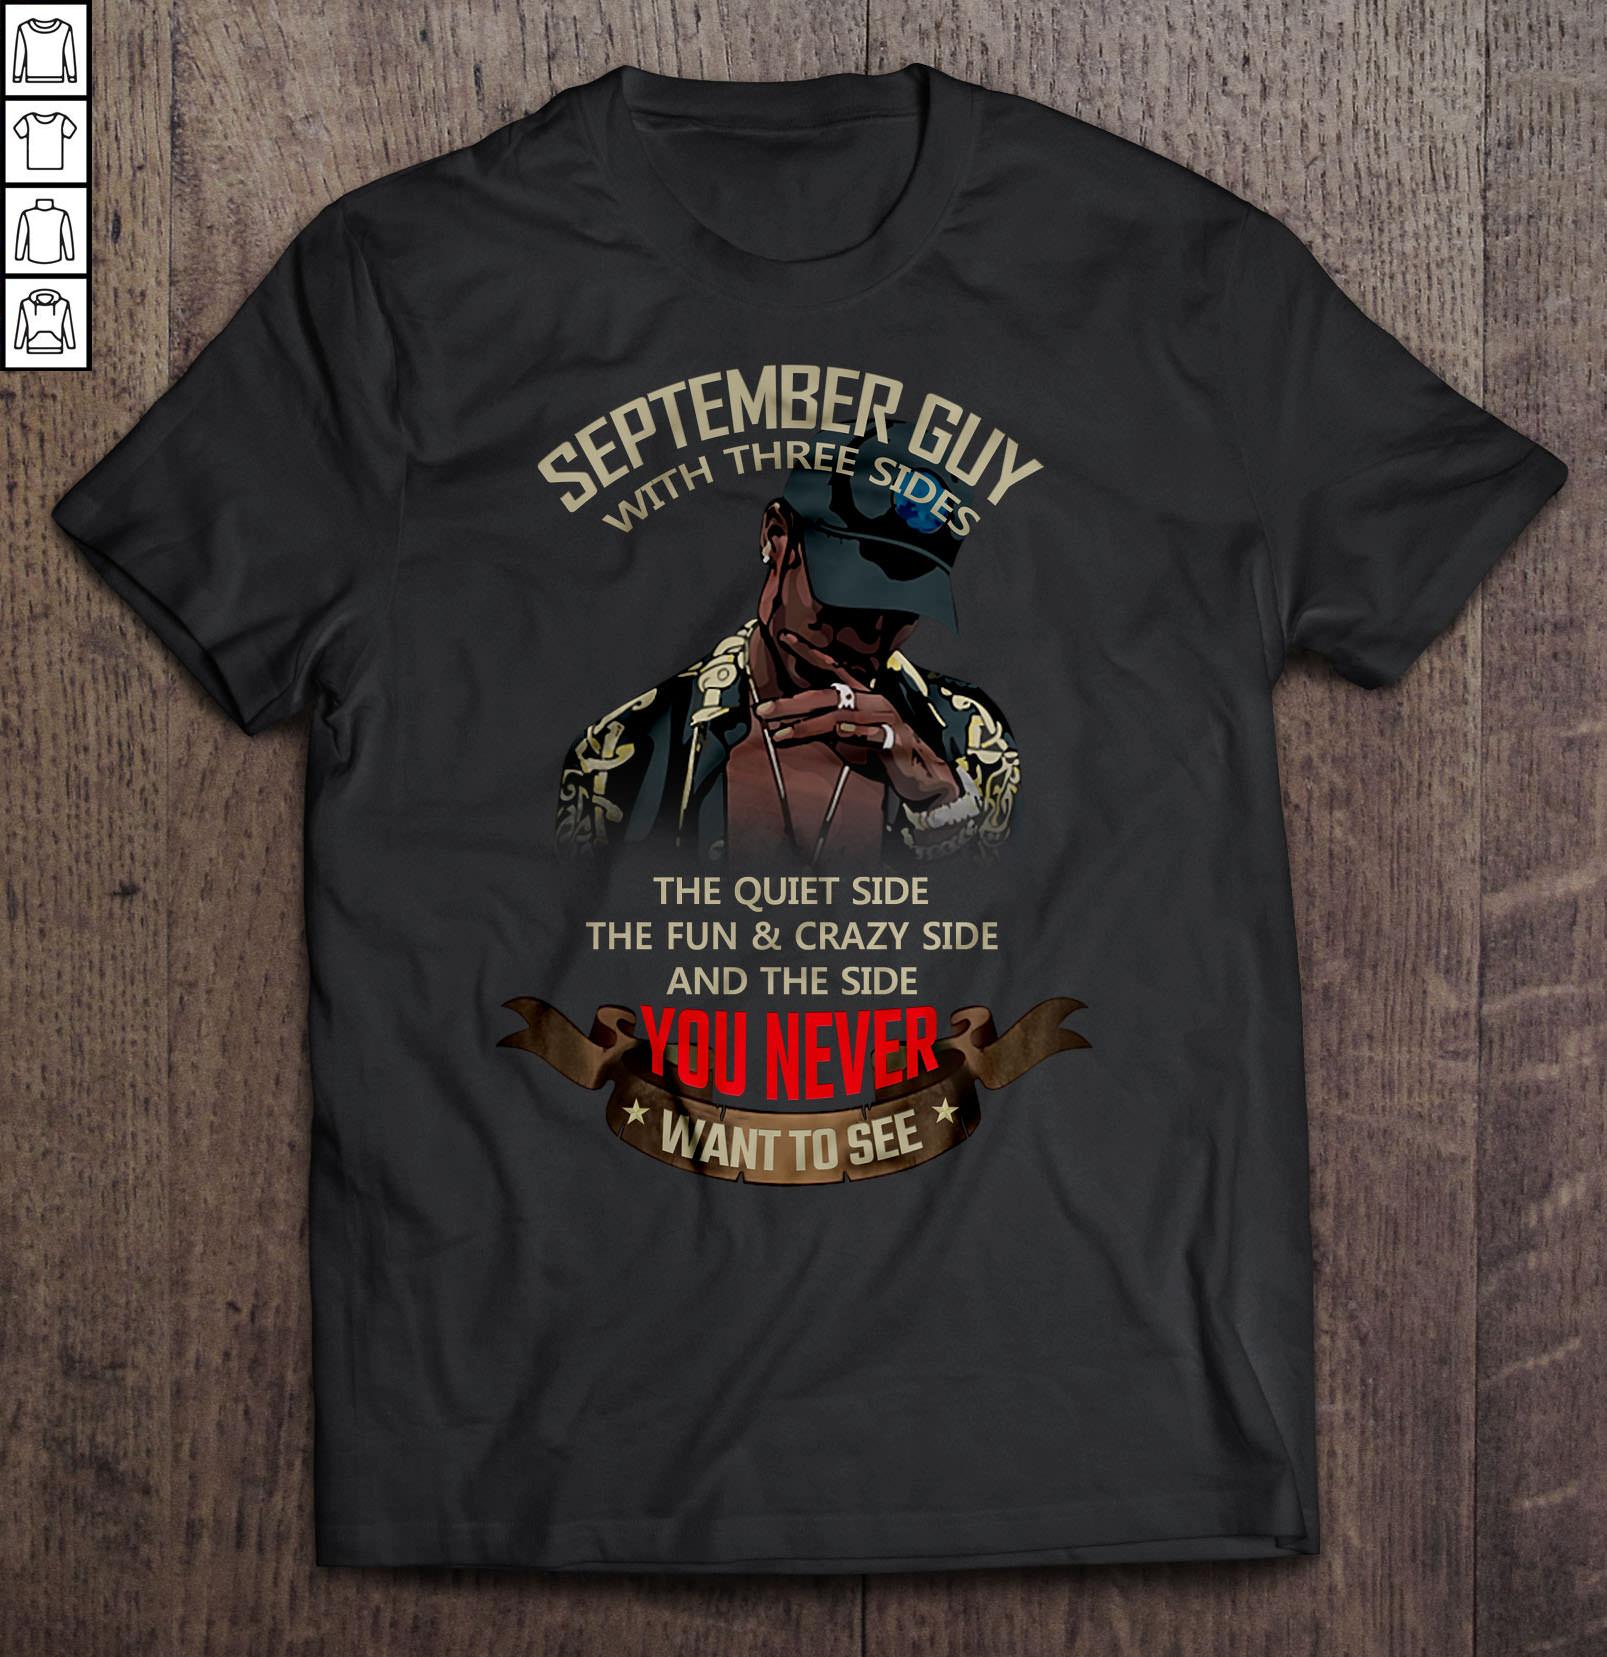 September Guy With Three Sides The Quiet Side The Fun & Crazy Side – Big Sean T-shirt